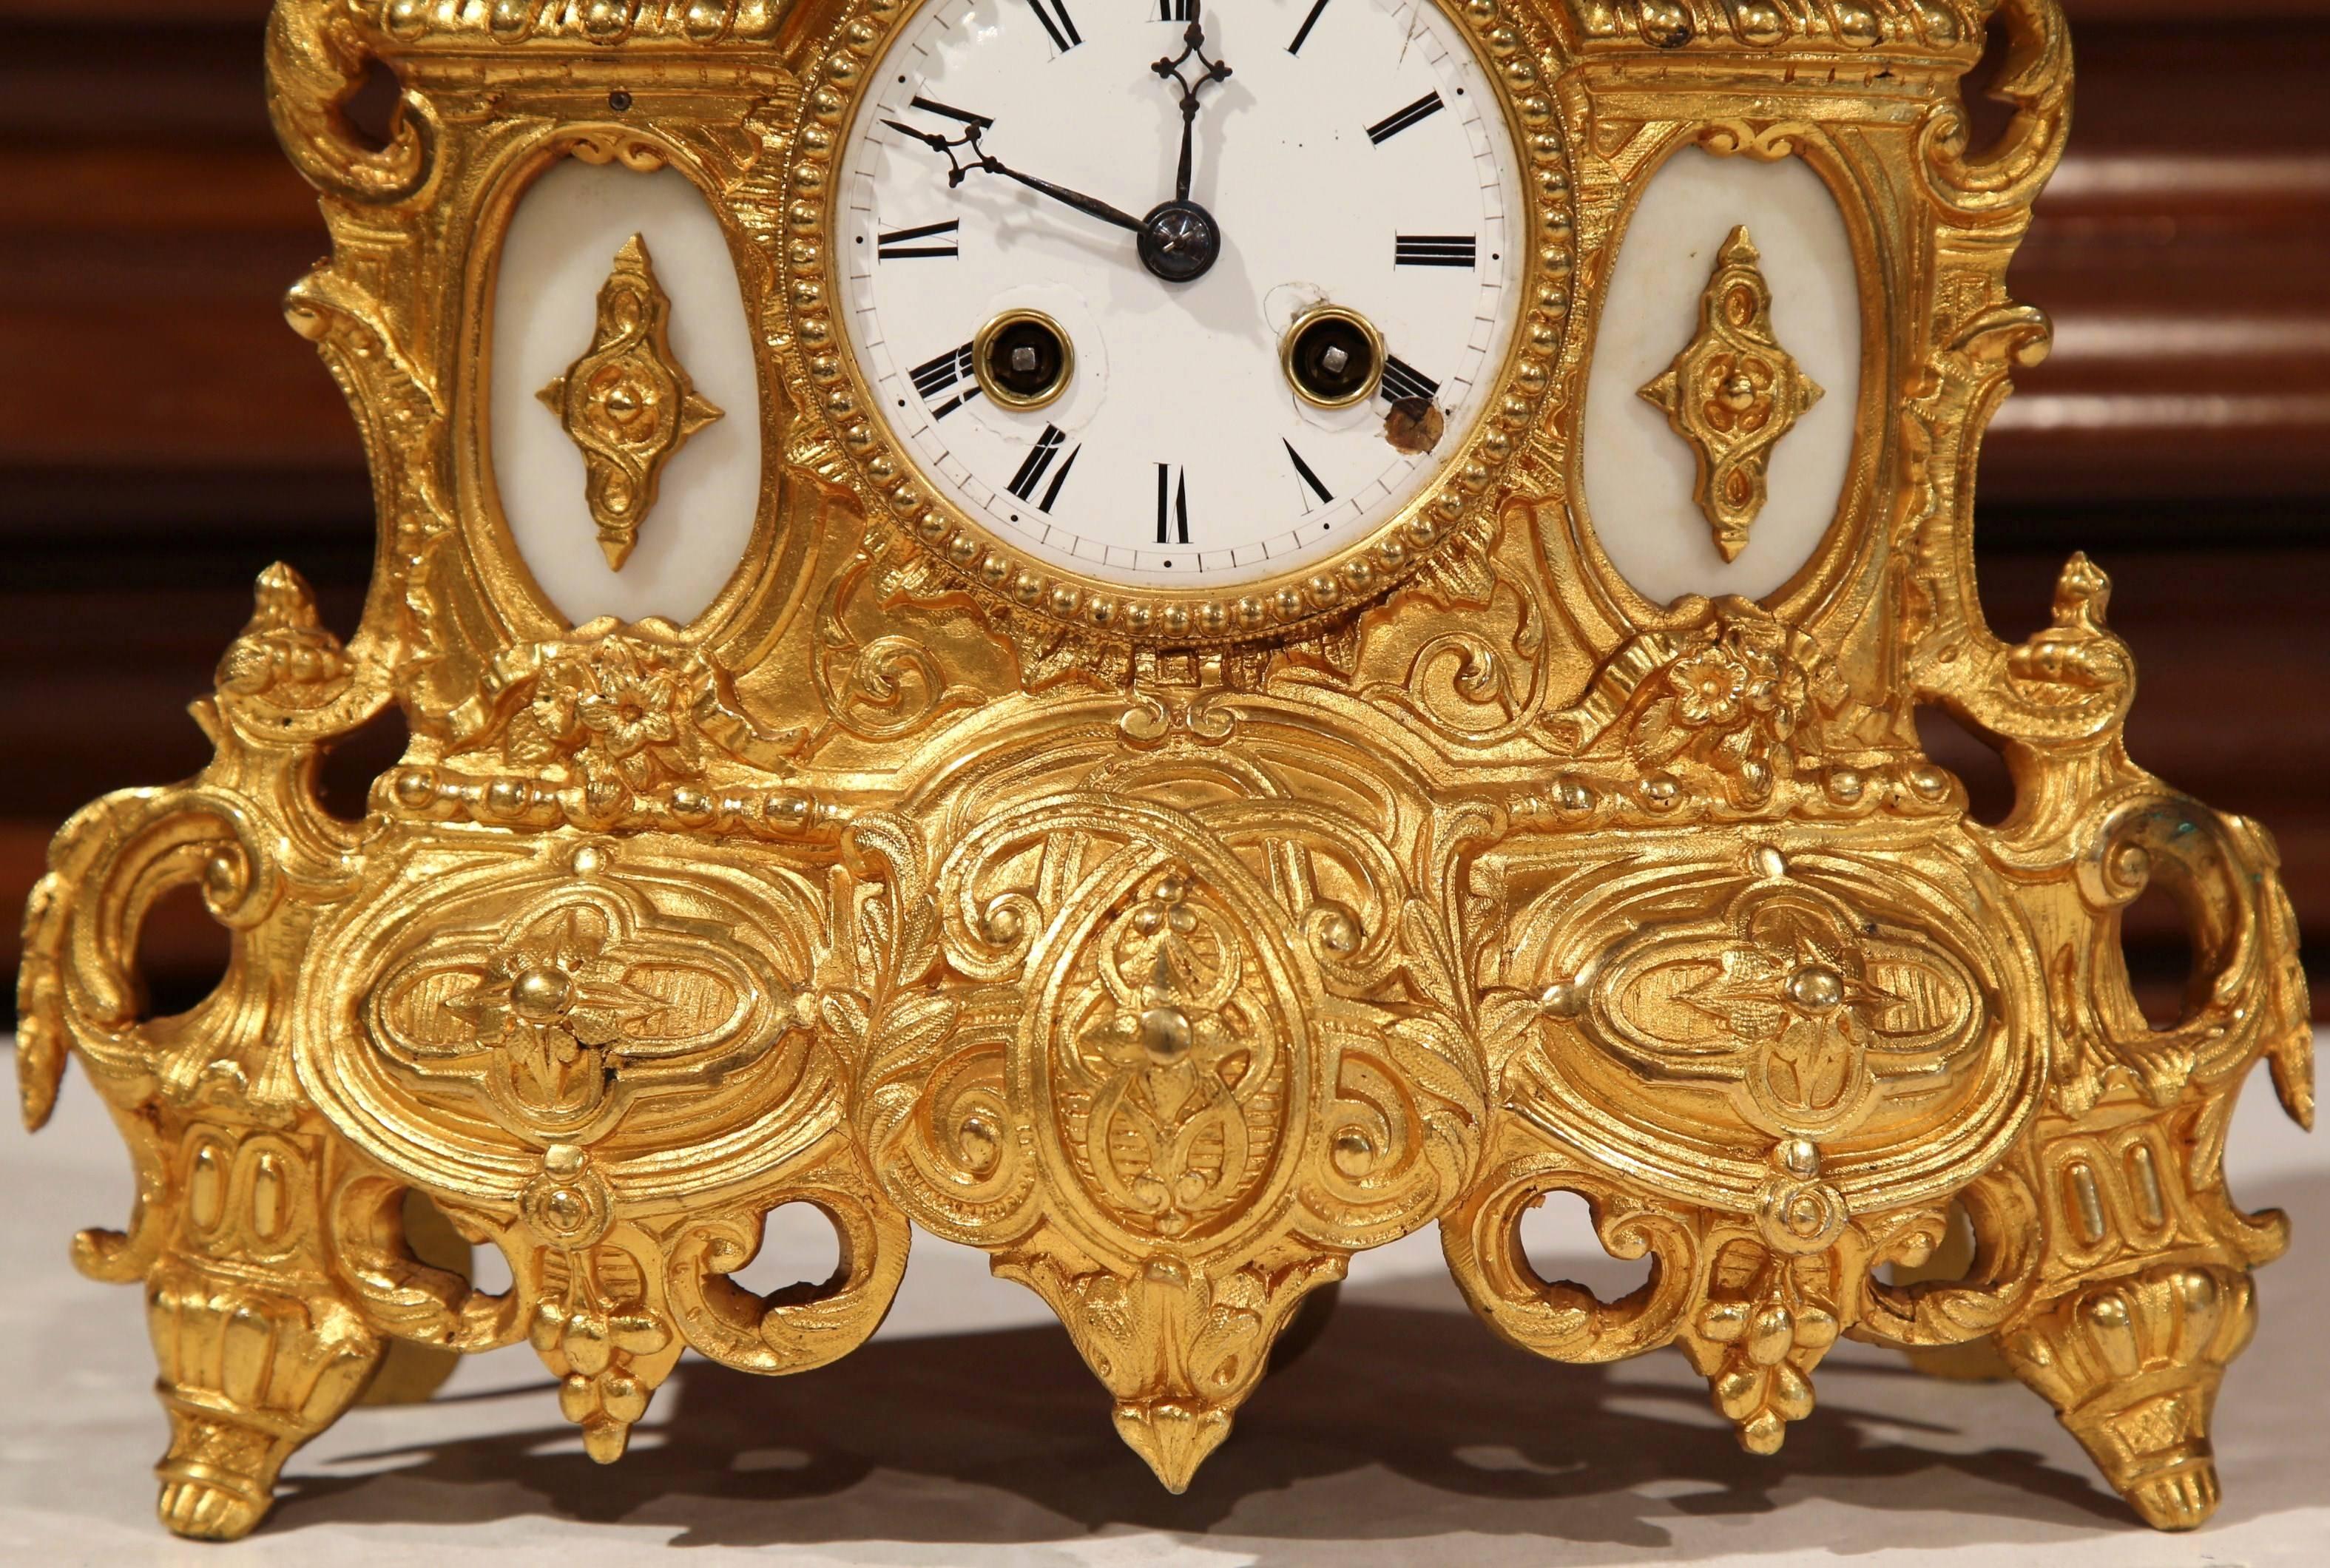 Hand-Crafted 19th Century French Renaissance Style Bronze Doré Mantel Clock